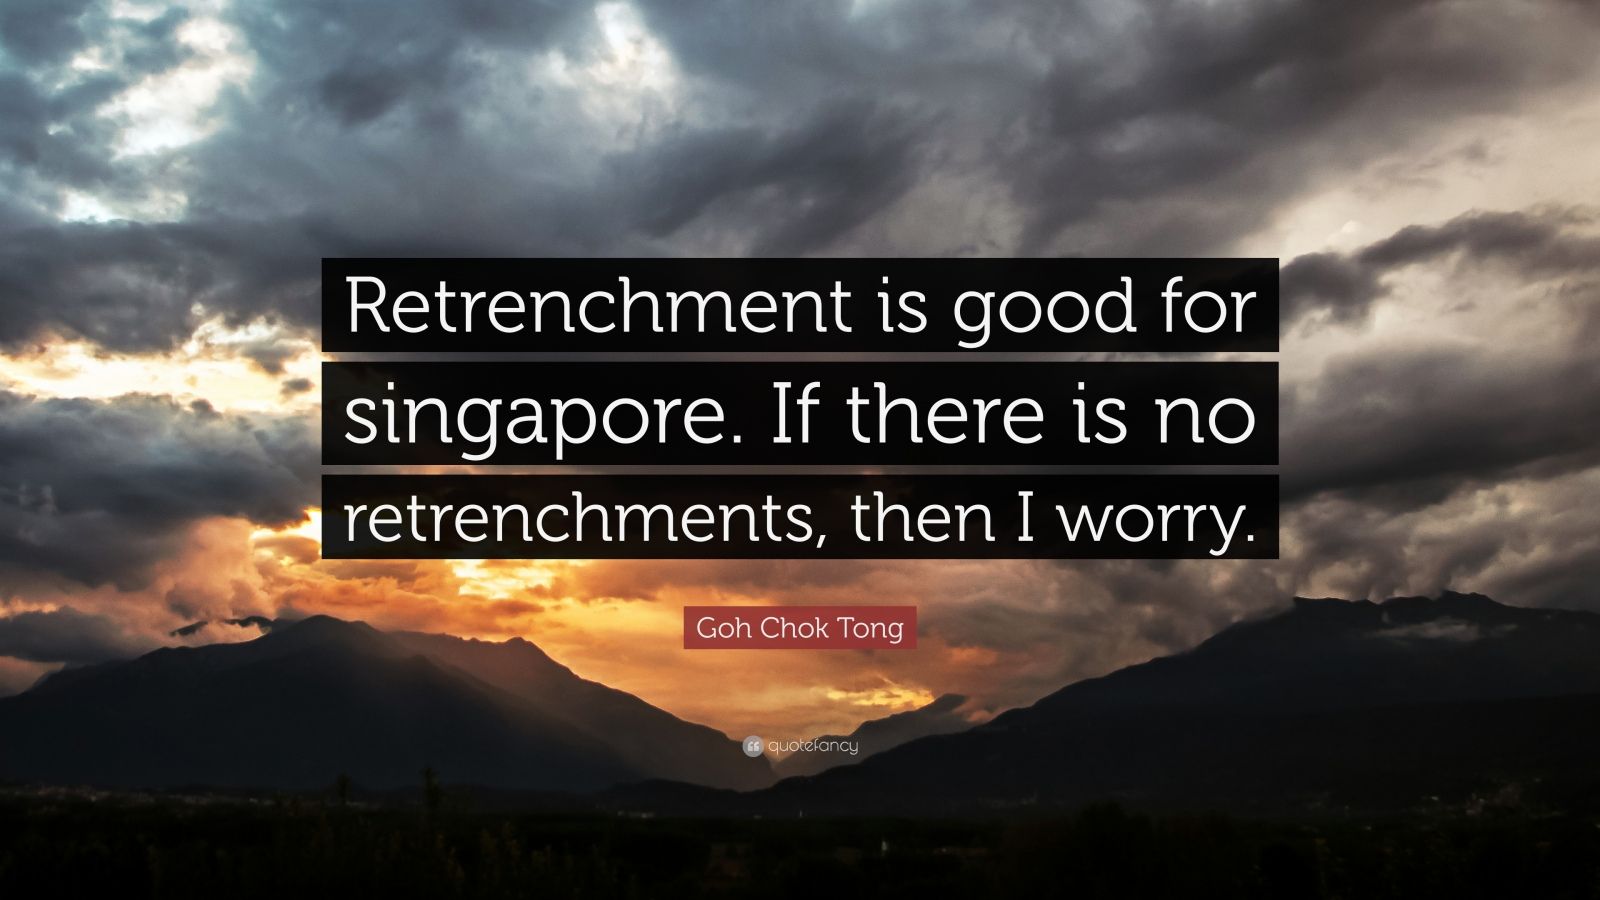 1588493-Goh-Chok-Tong-Quote-Retrenchment-is-good-for-singapore-If-there-is.jpg